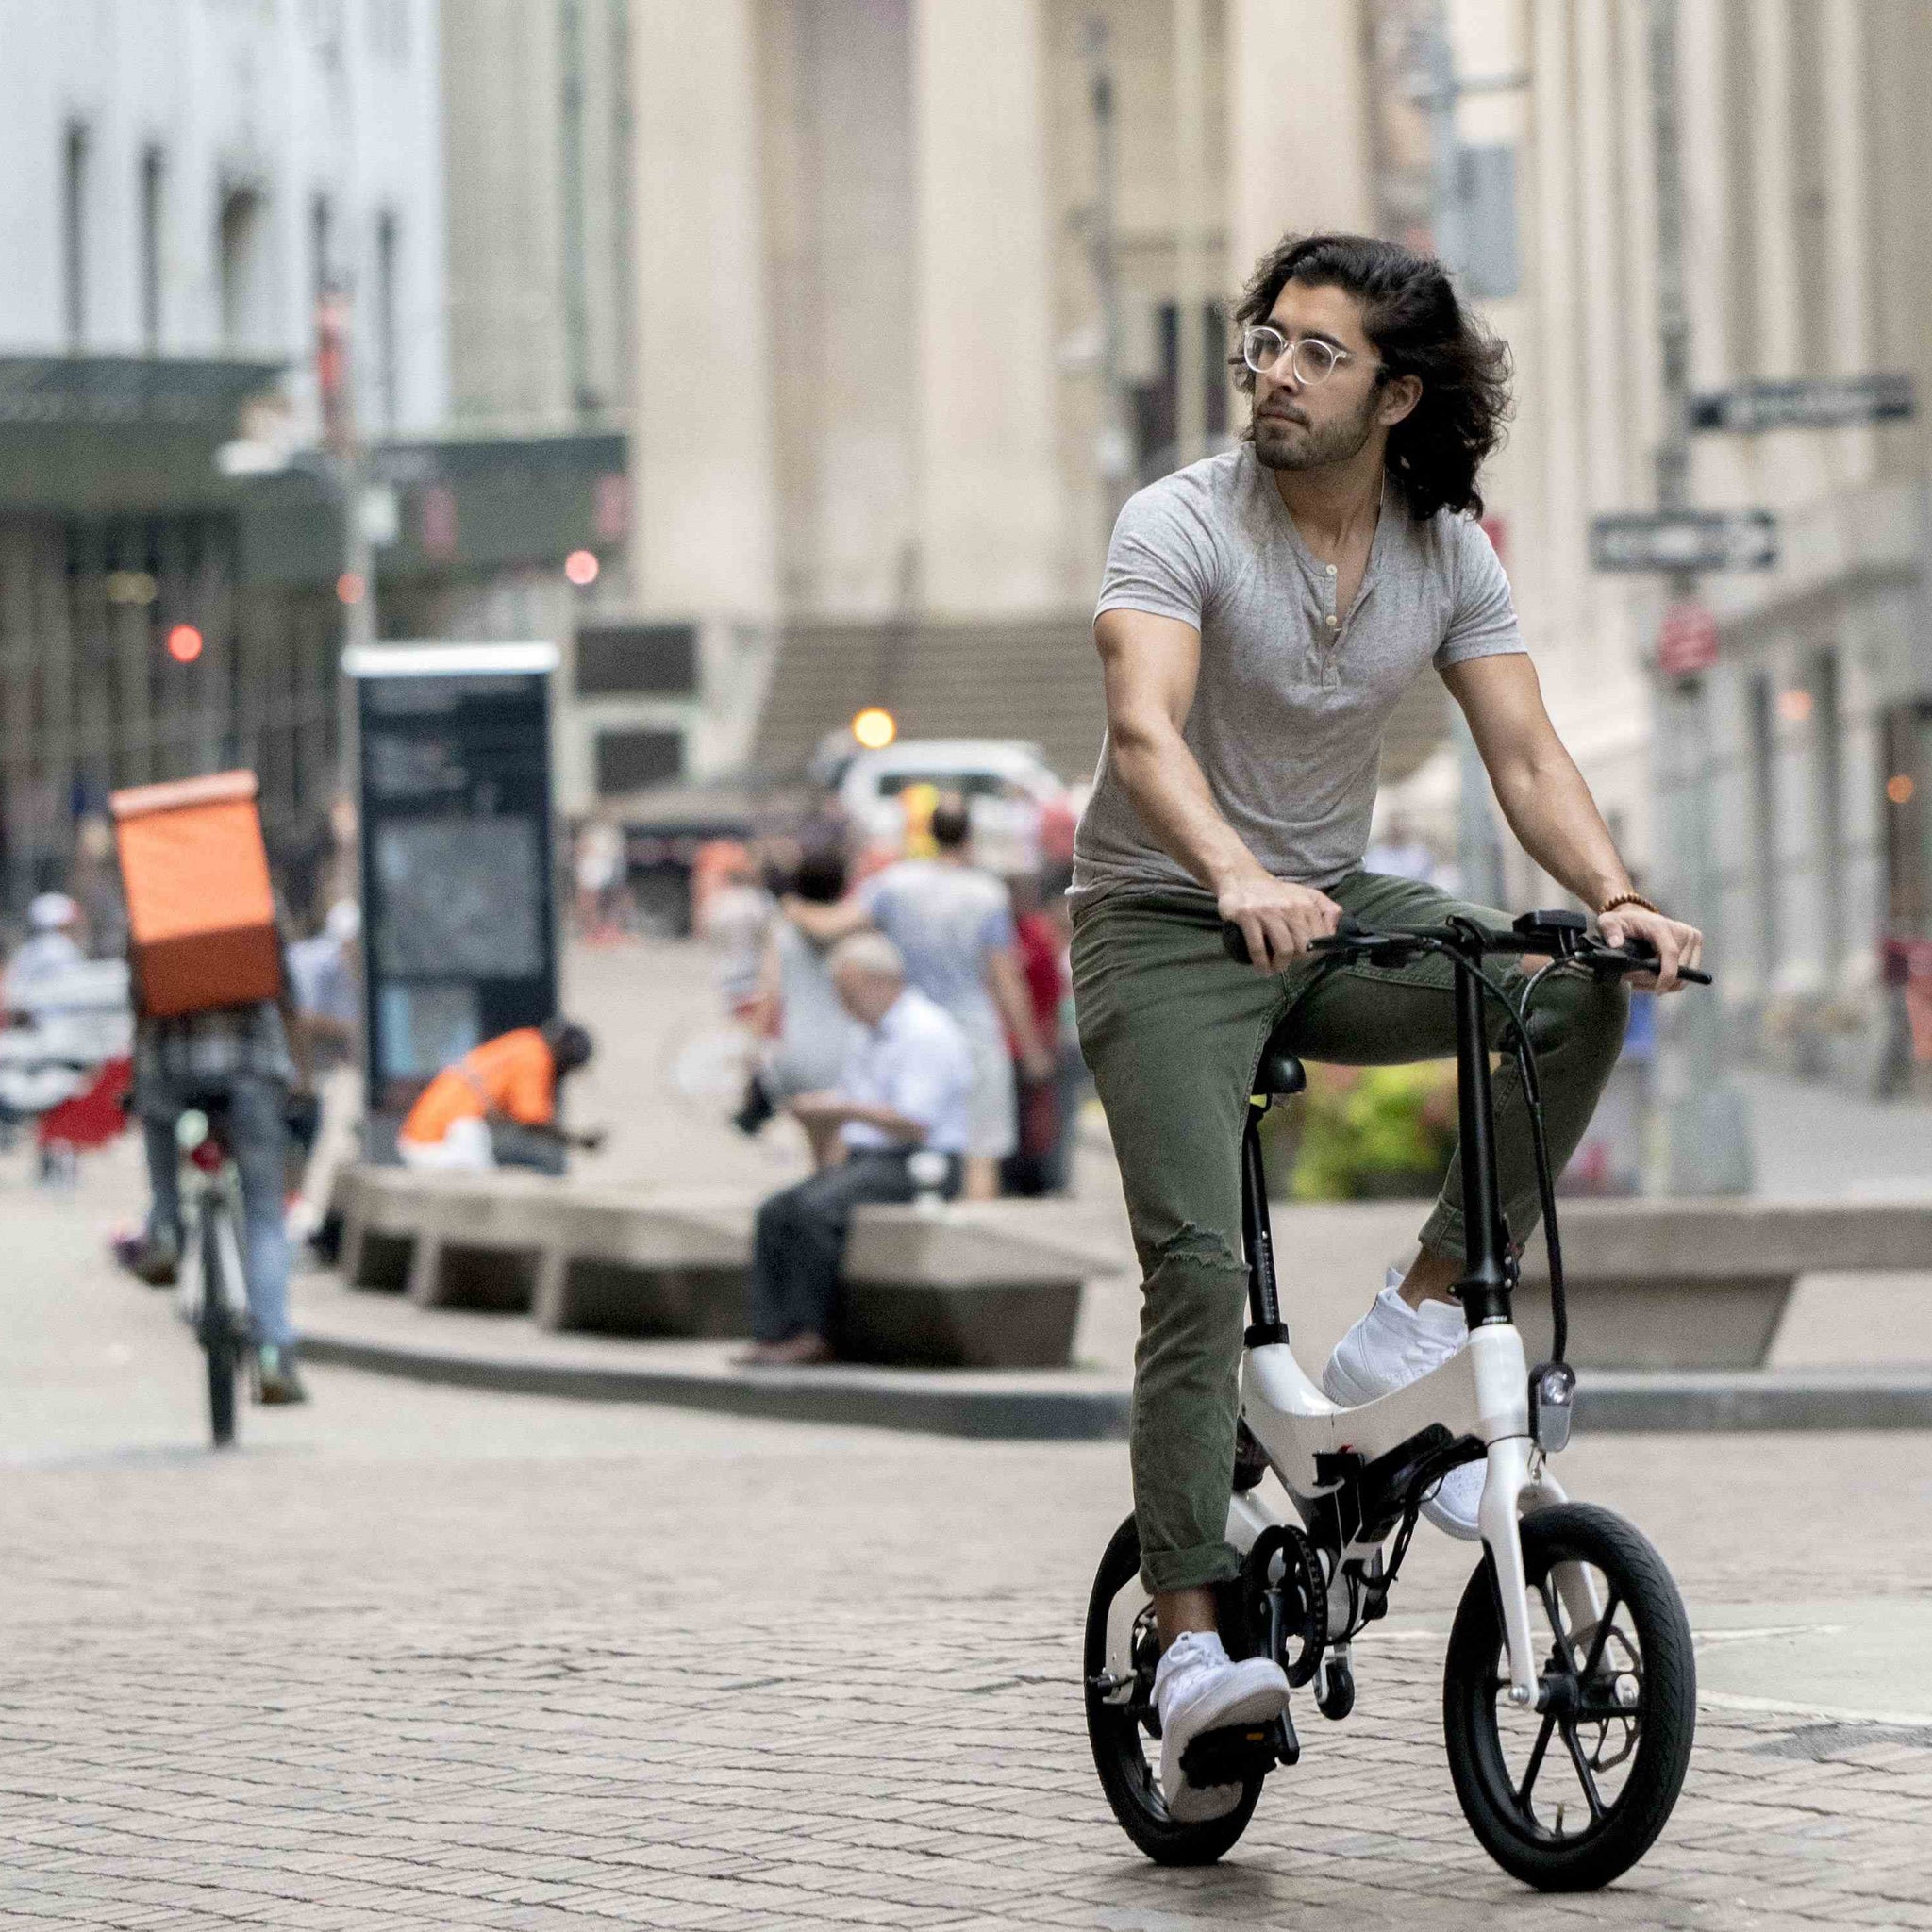 Are E-Bikes and E-Scooters Legal in NYC? 2020 Update